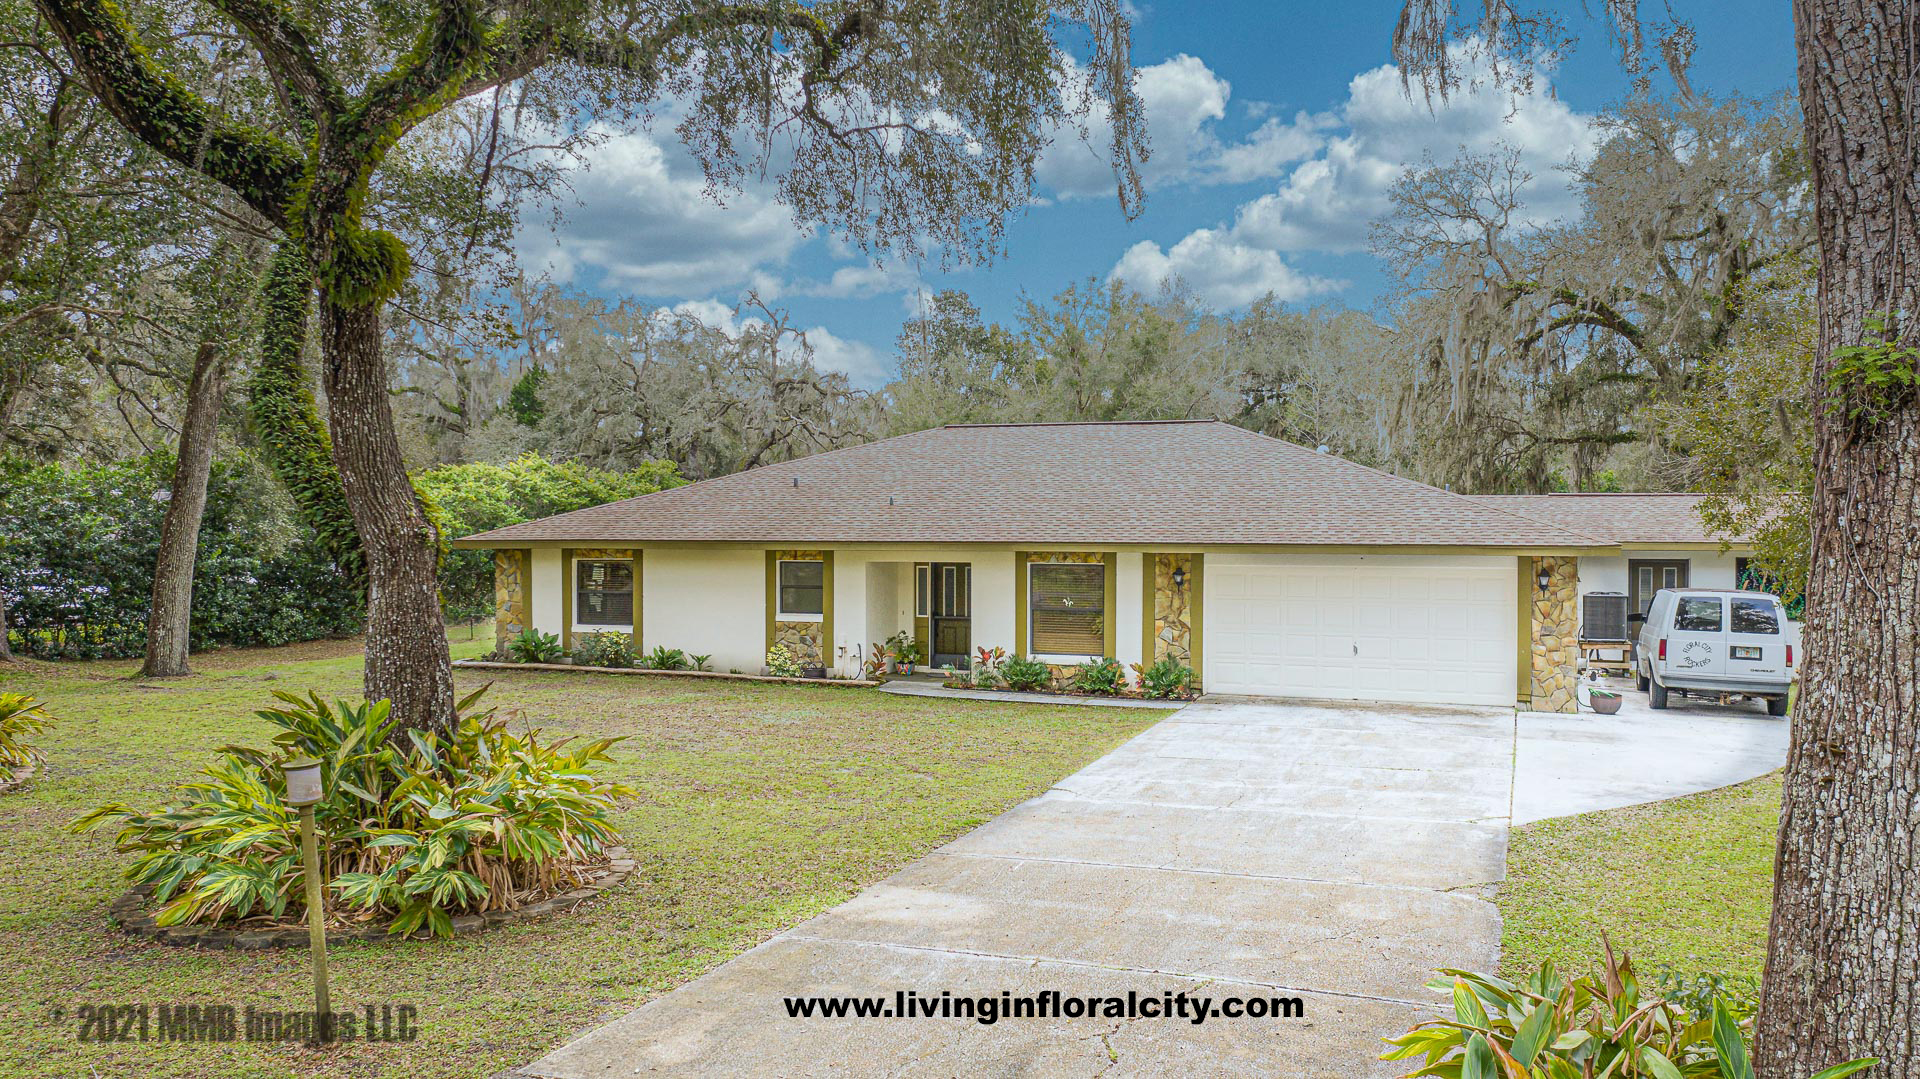 Real Estate Listing Photo for the Real Estate Home and Property for Sale on 1 Acre on 7121 E Manchester Ct. in the South Hampshire Subdivision of Floral City, Citrus County, Florida 34436